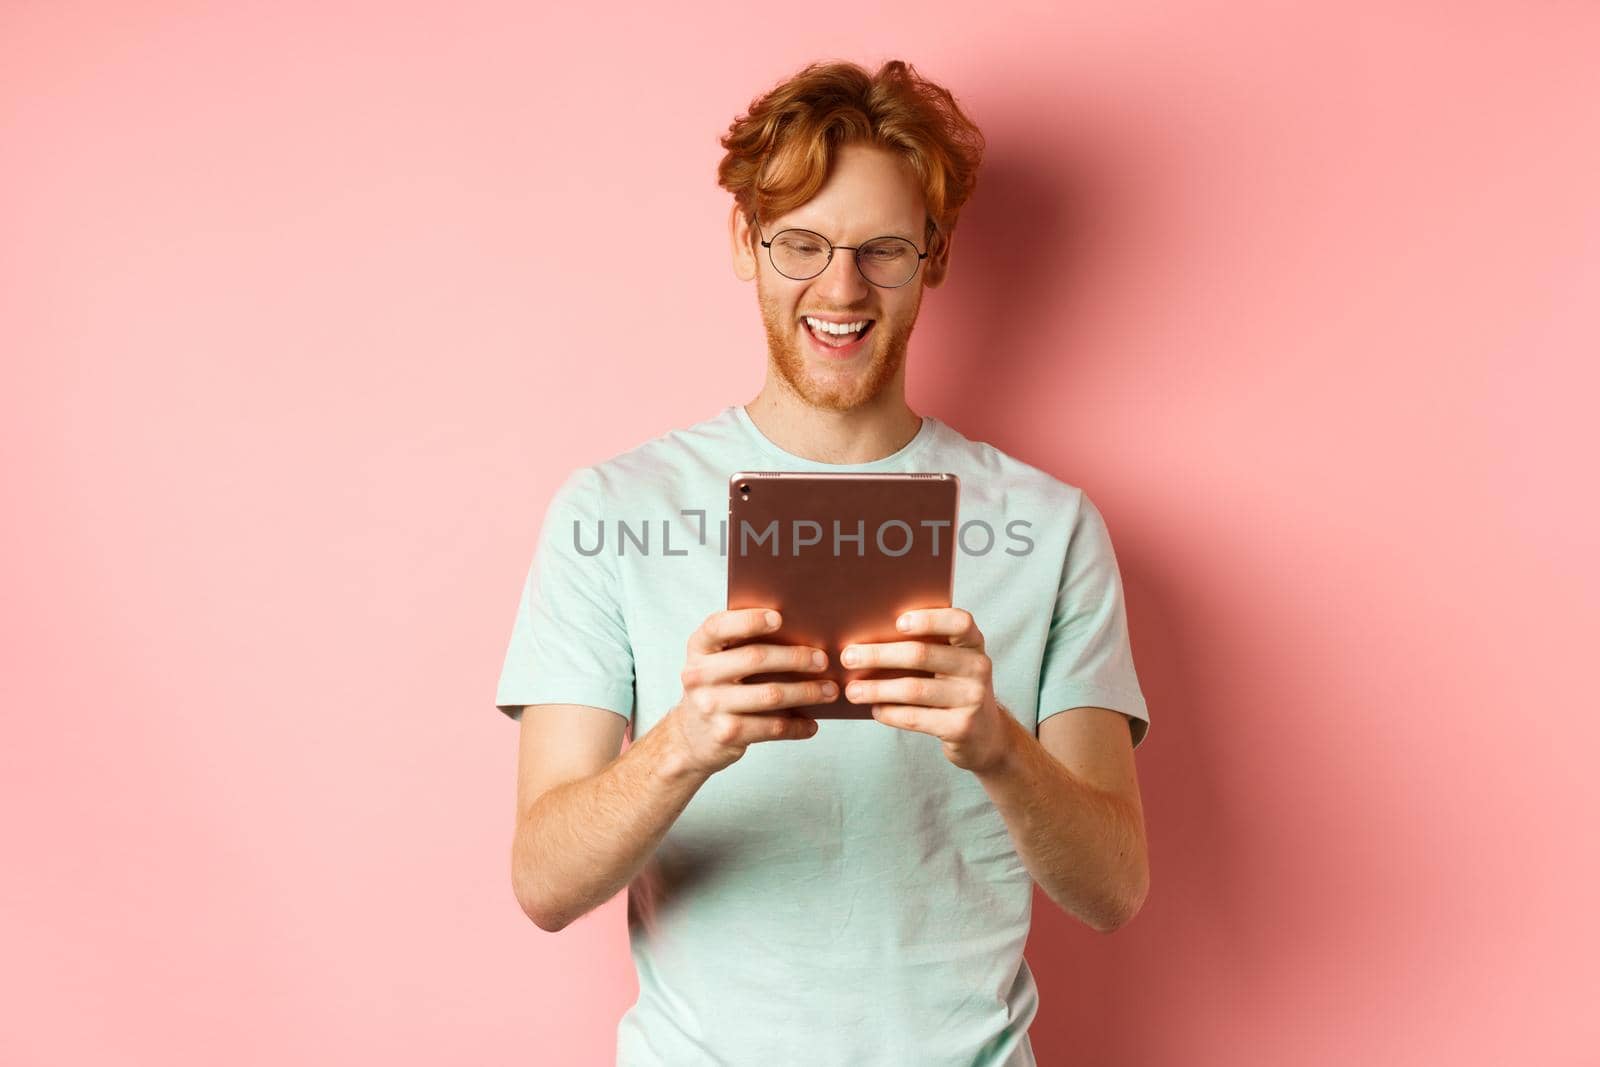 Happy guy with red hair and beard using digital tablet, reading screen and smiling, standing over pink background.